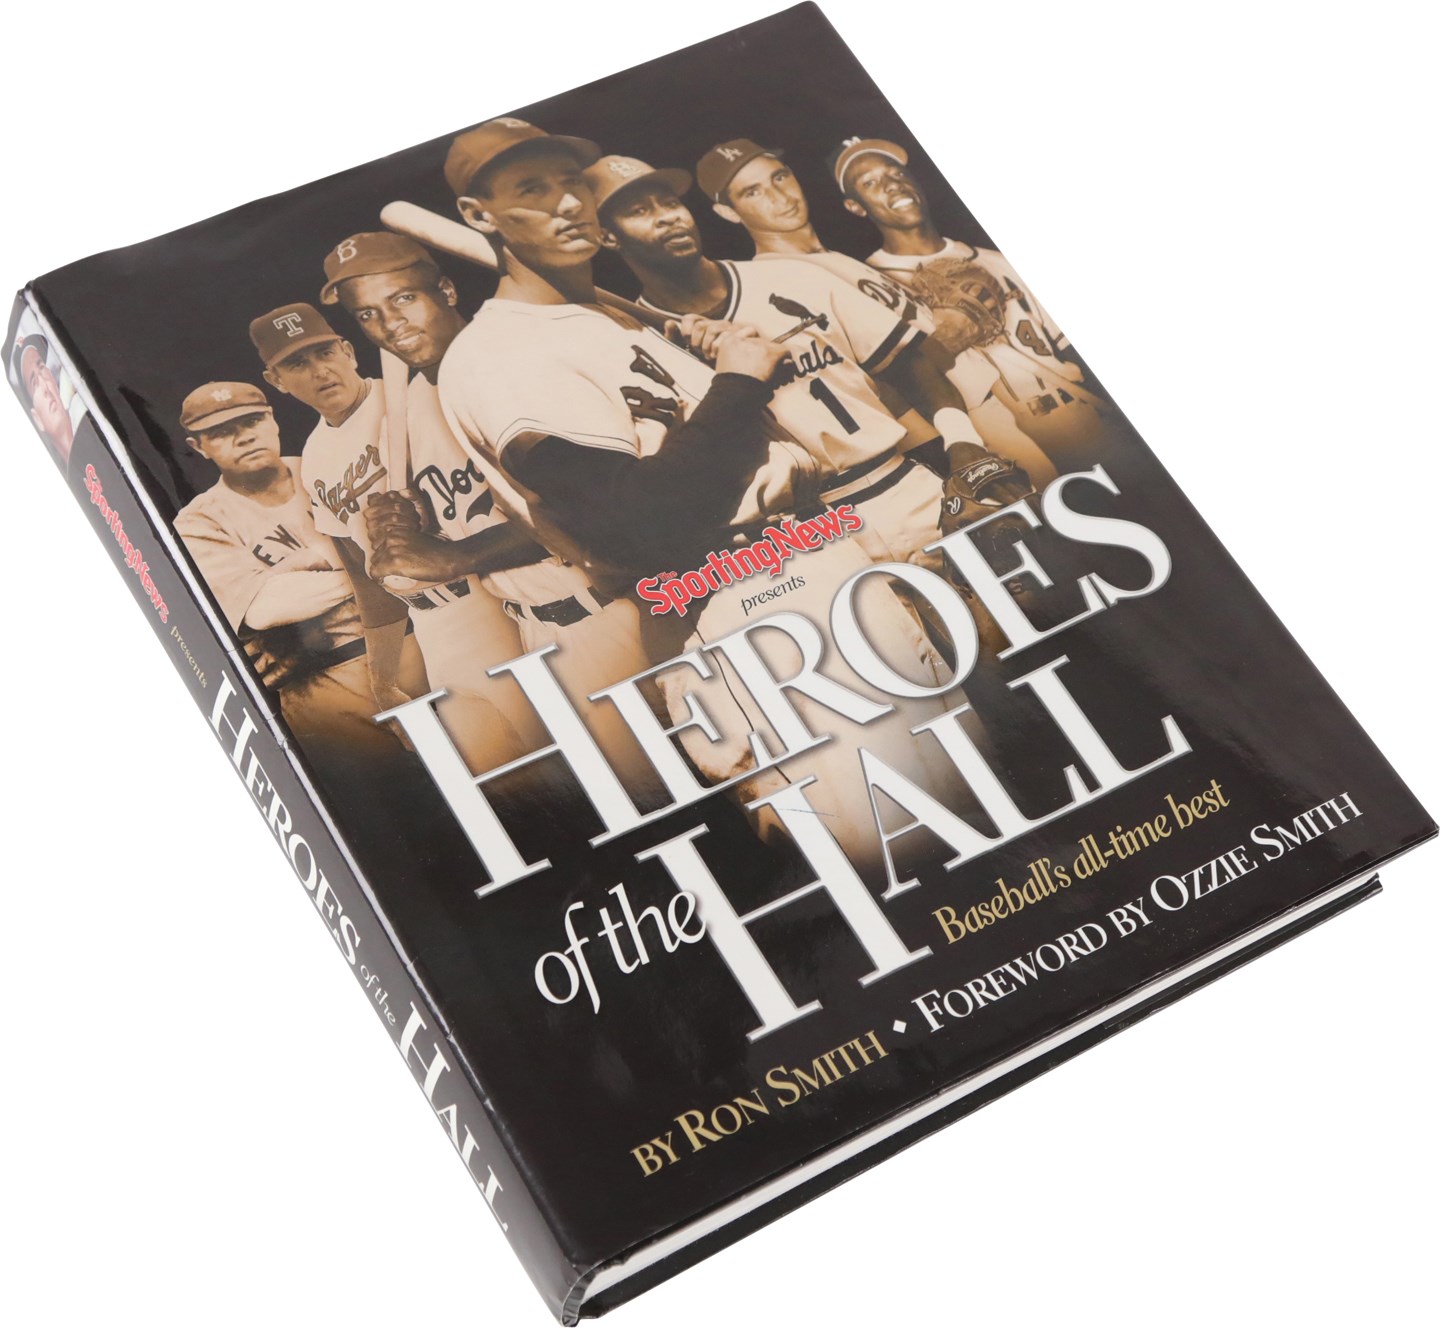 Baseball Autographs - "Heroes of the Hall" Book Signed by 42 Hall of Famers (JSA)